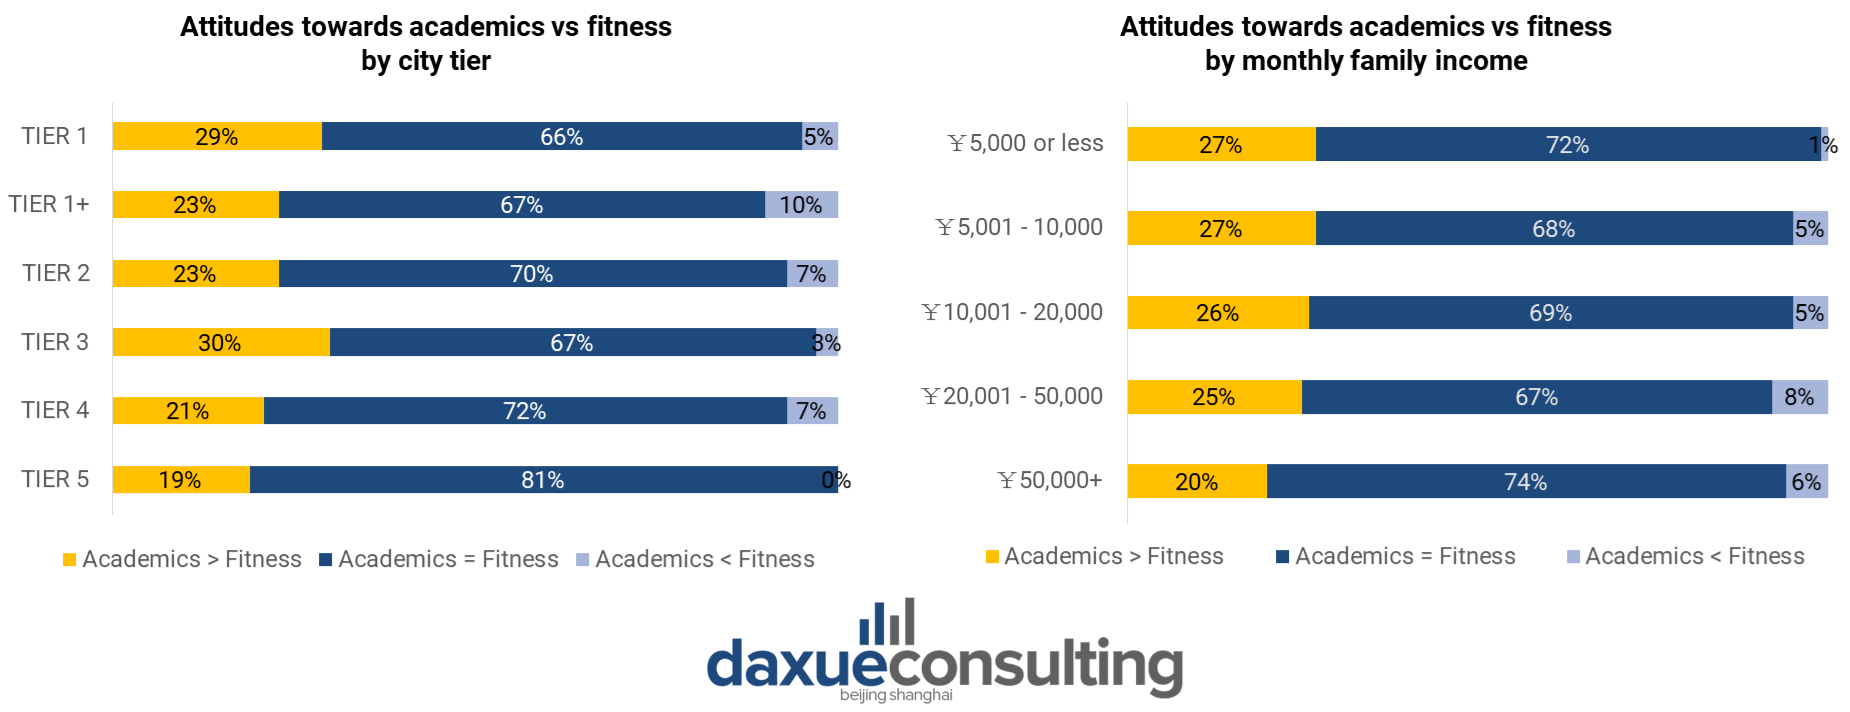 daxue consulting survey, November 2021, n=1,000, Chinese parents perceptions of the importance of fitness vs. academics.